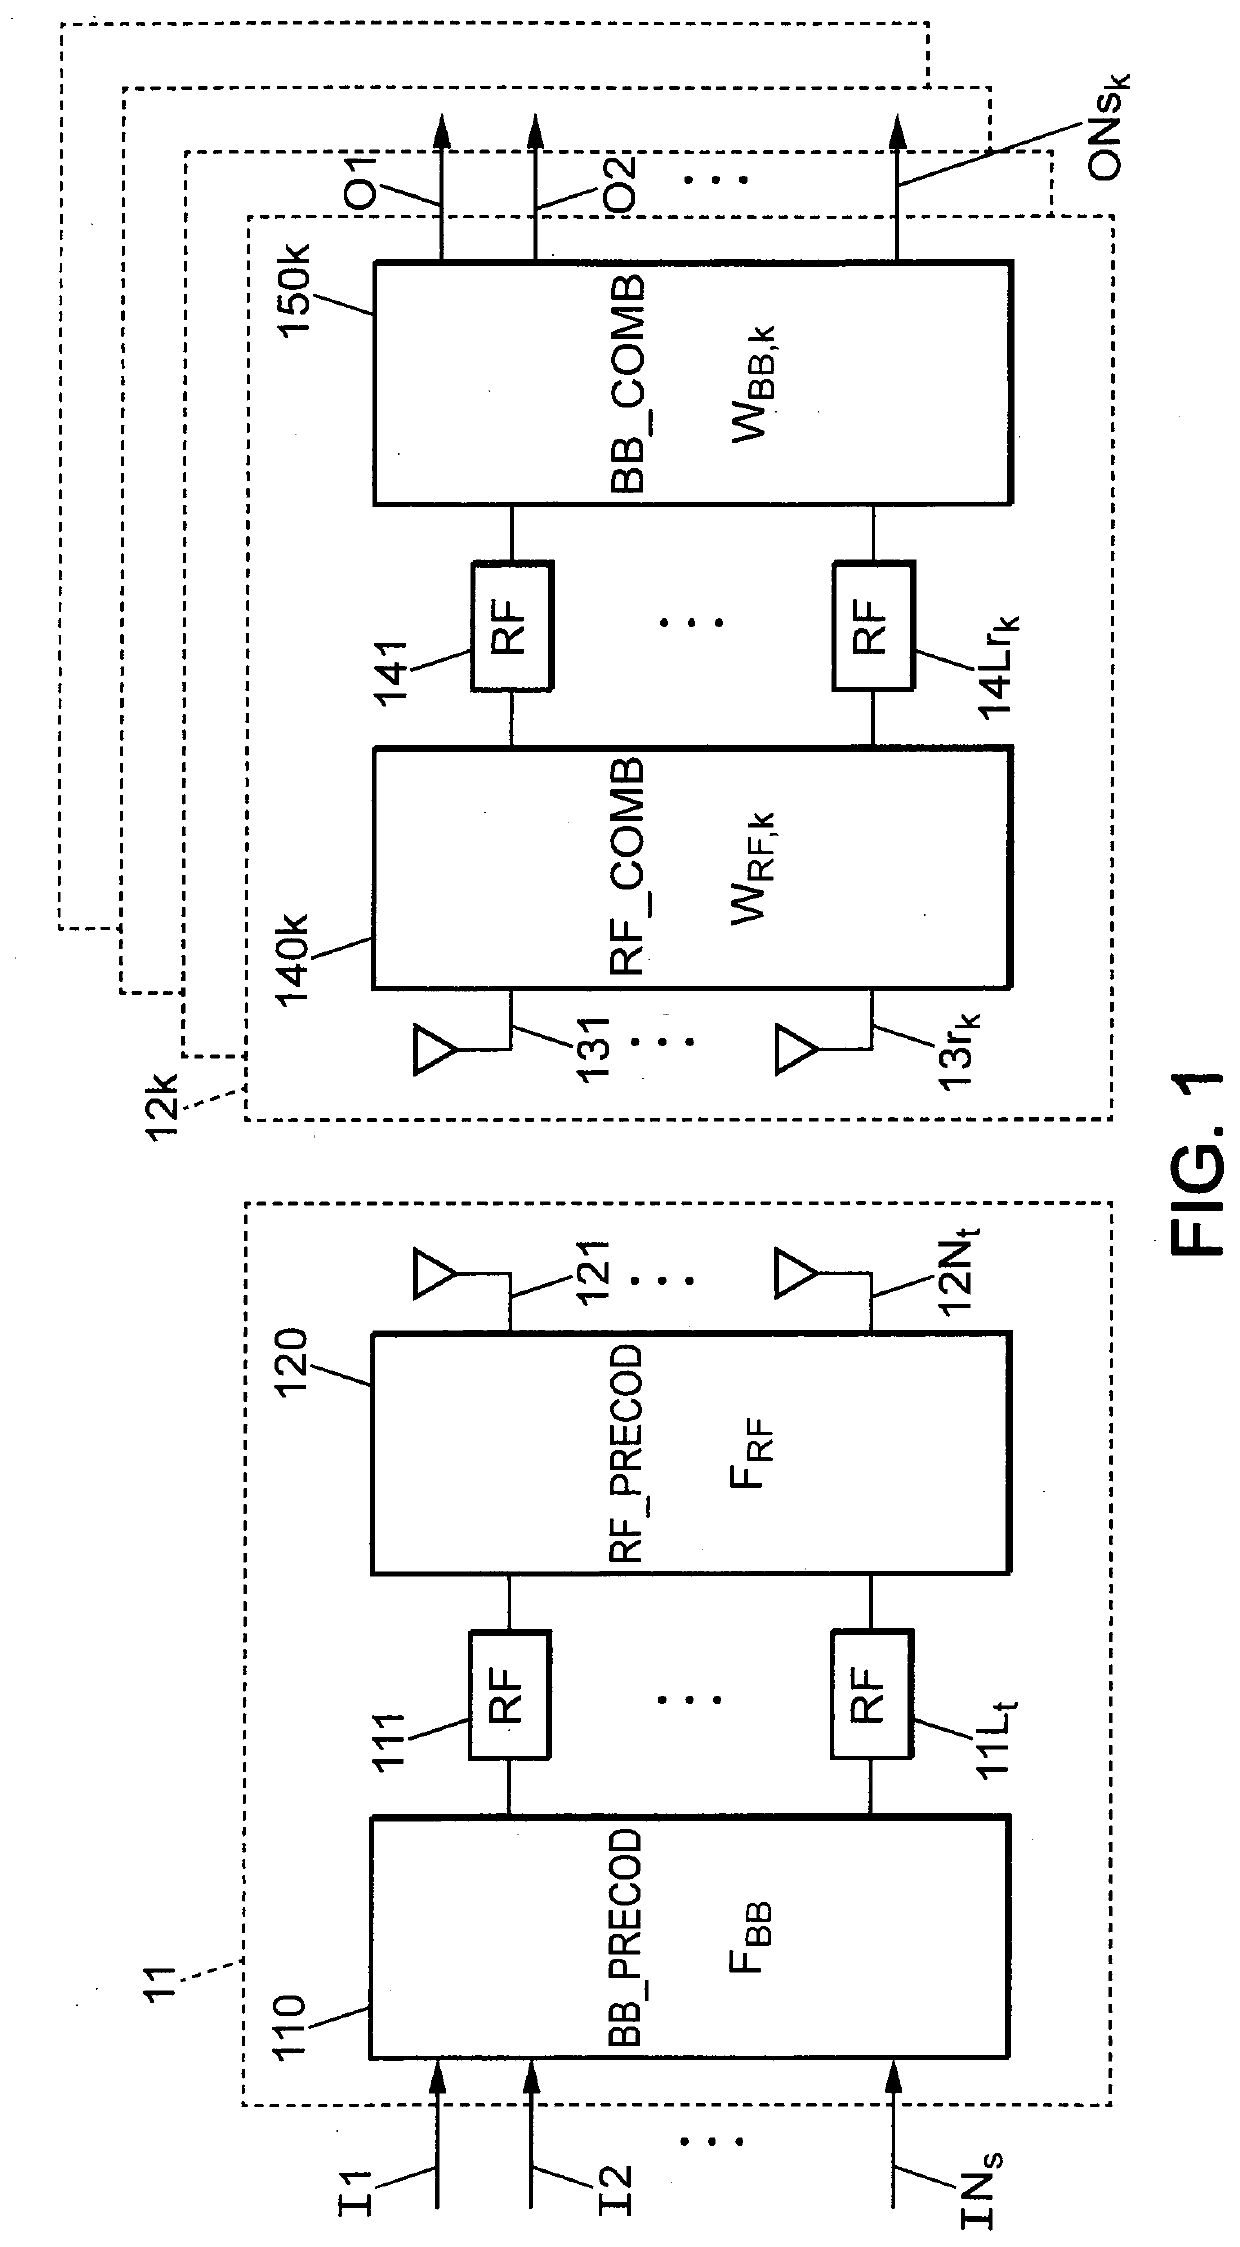 Receiver, communication system, and method implemented by computer for enabling both analog and digital beamforming in communication system